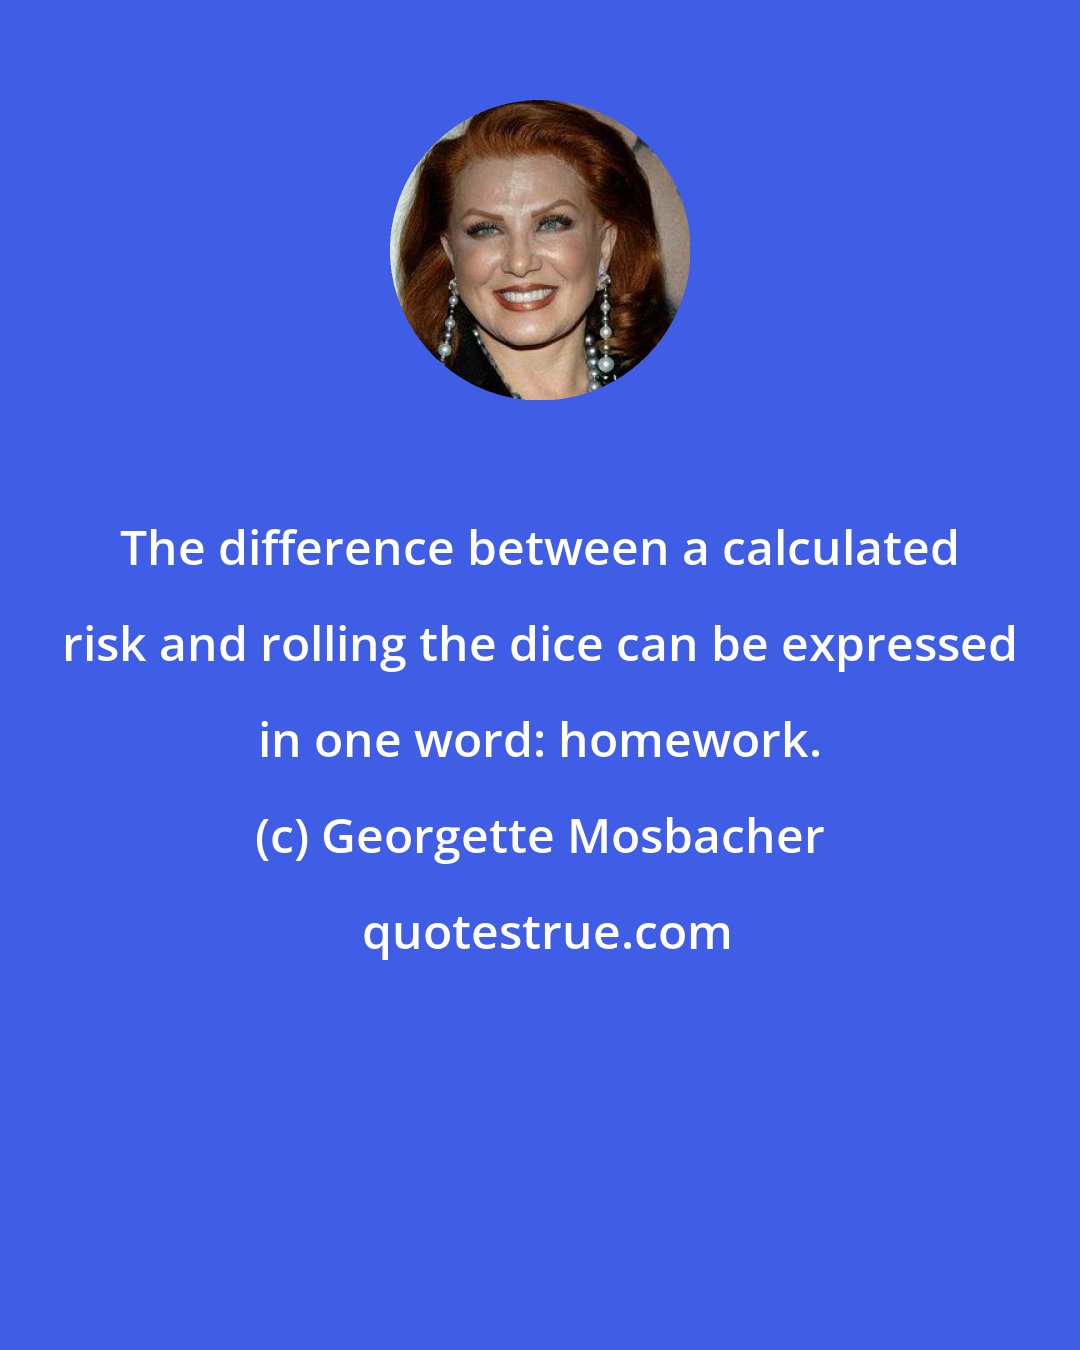 Georgette Mosbacher: The difference between a calculated risk and rolling the dice can be expressed in one word: homework.